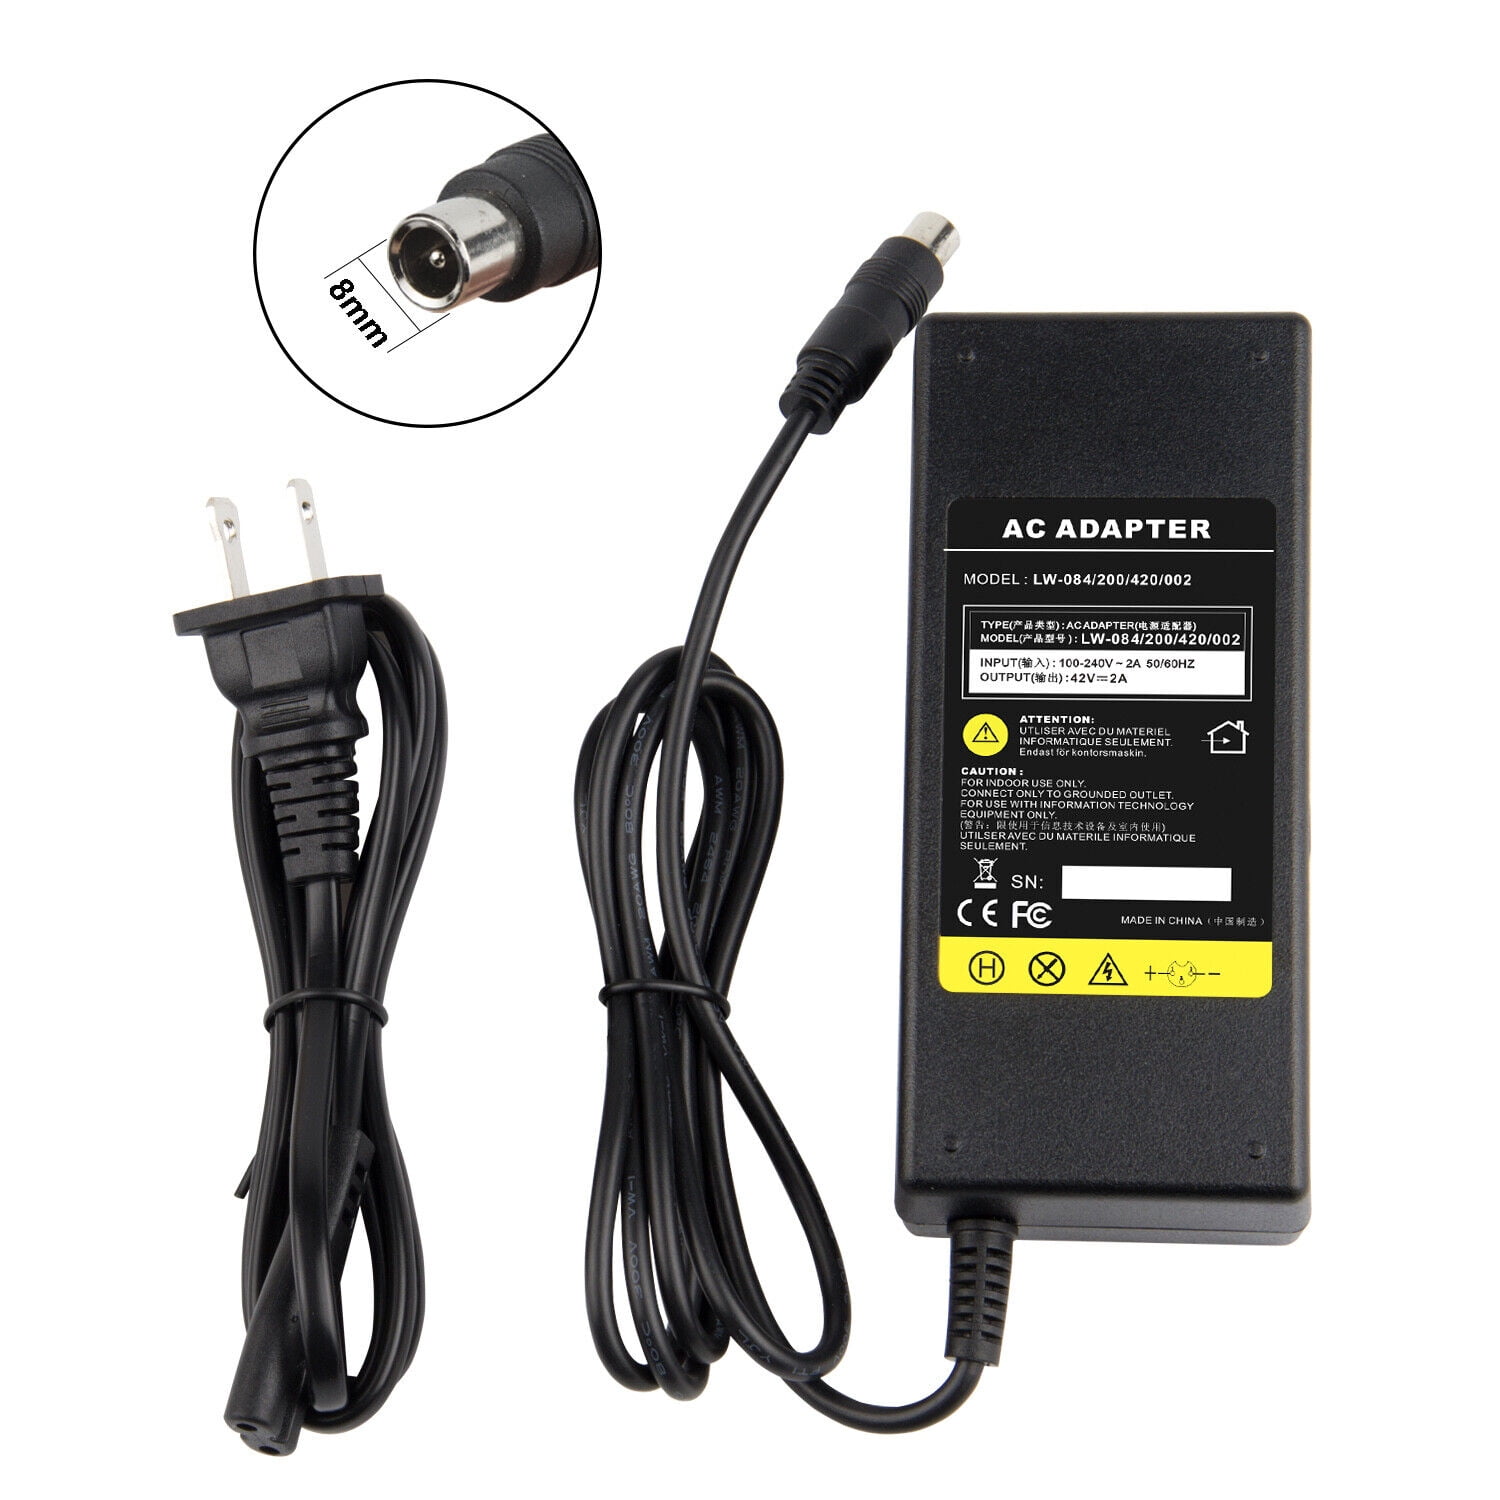 84W 42V 2A Charger for Bird Lime Lime-S Skip Spin Xiaomi M365 - Electric  Scooter Charger - Brid Charger,Lime Charger- 1 Pin